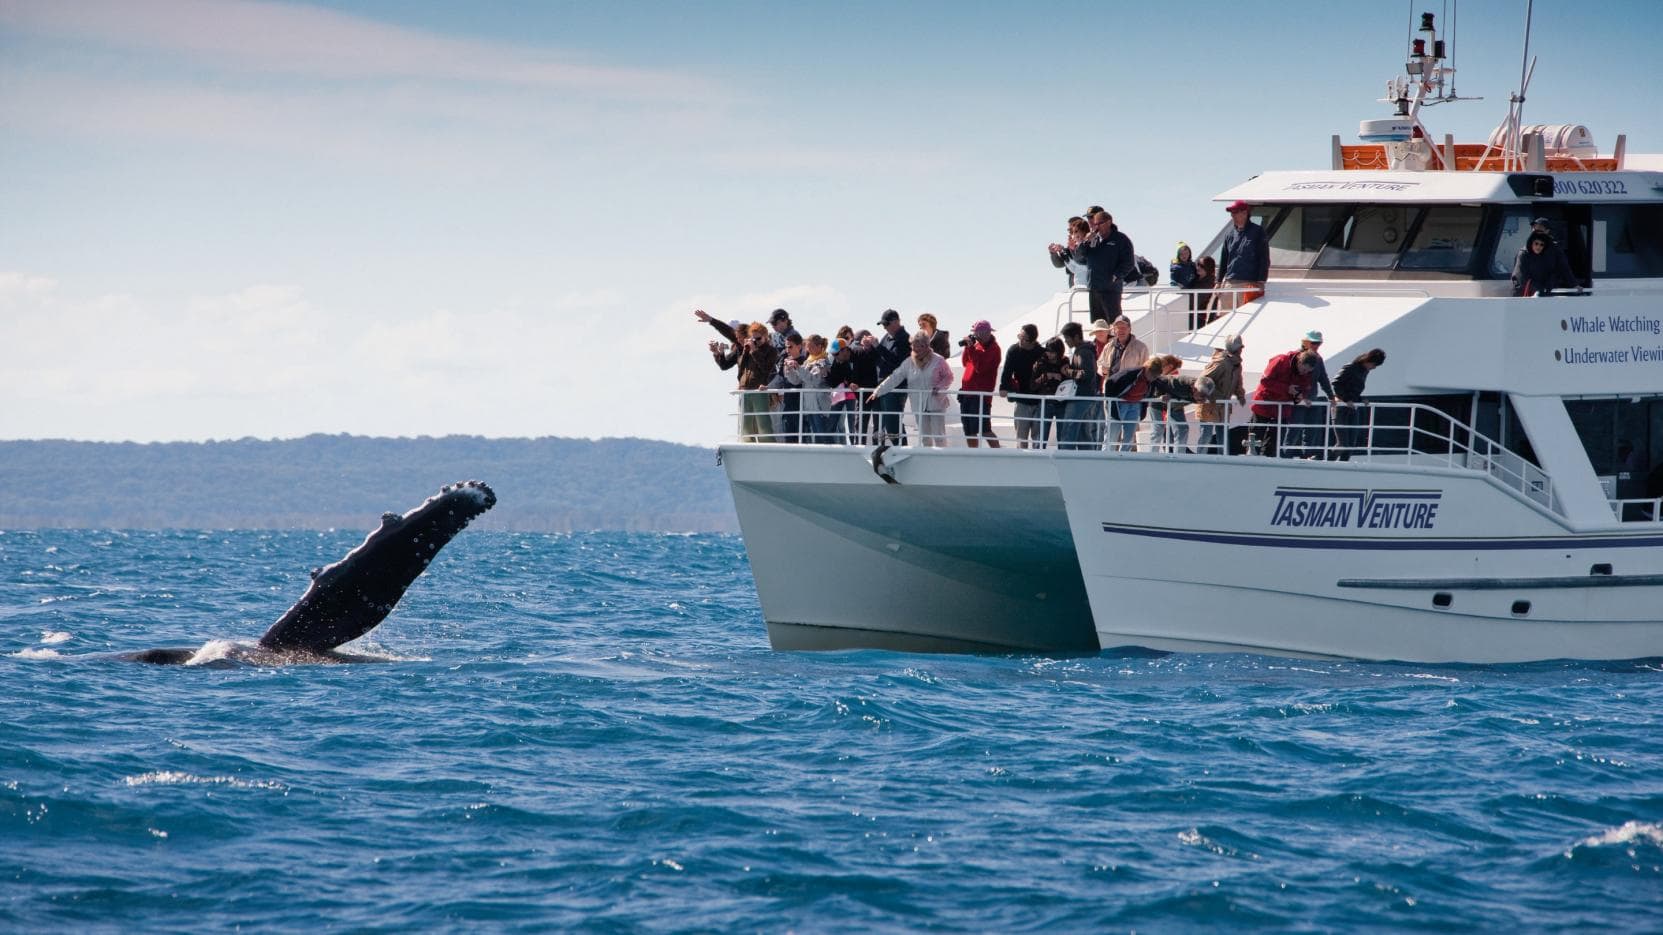 whale watching in Australia